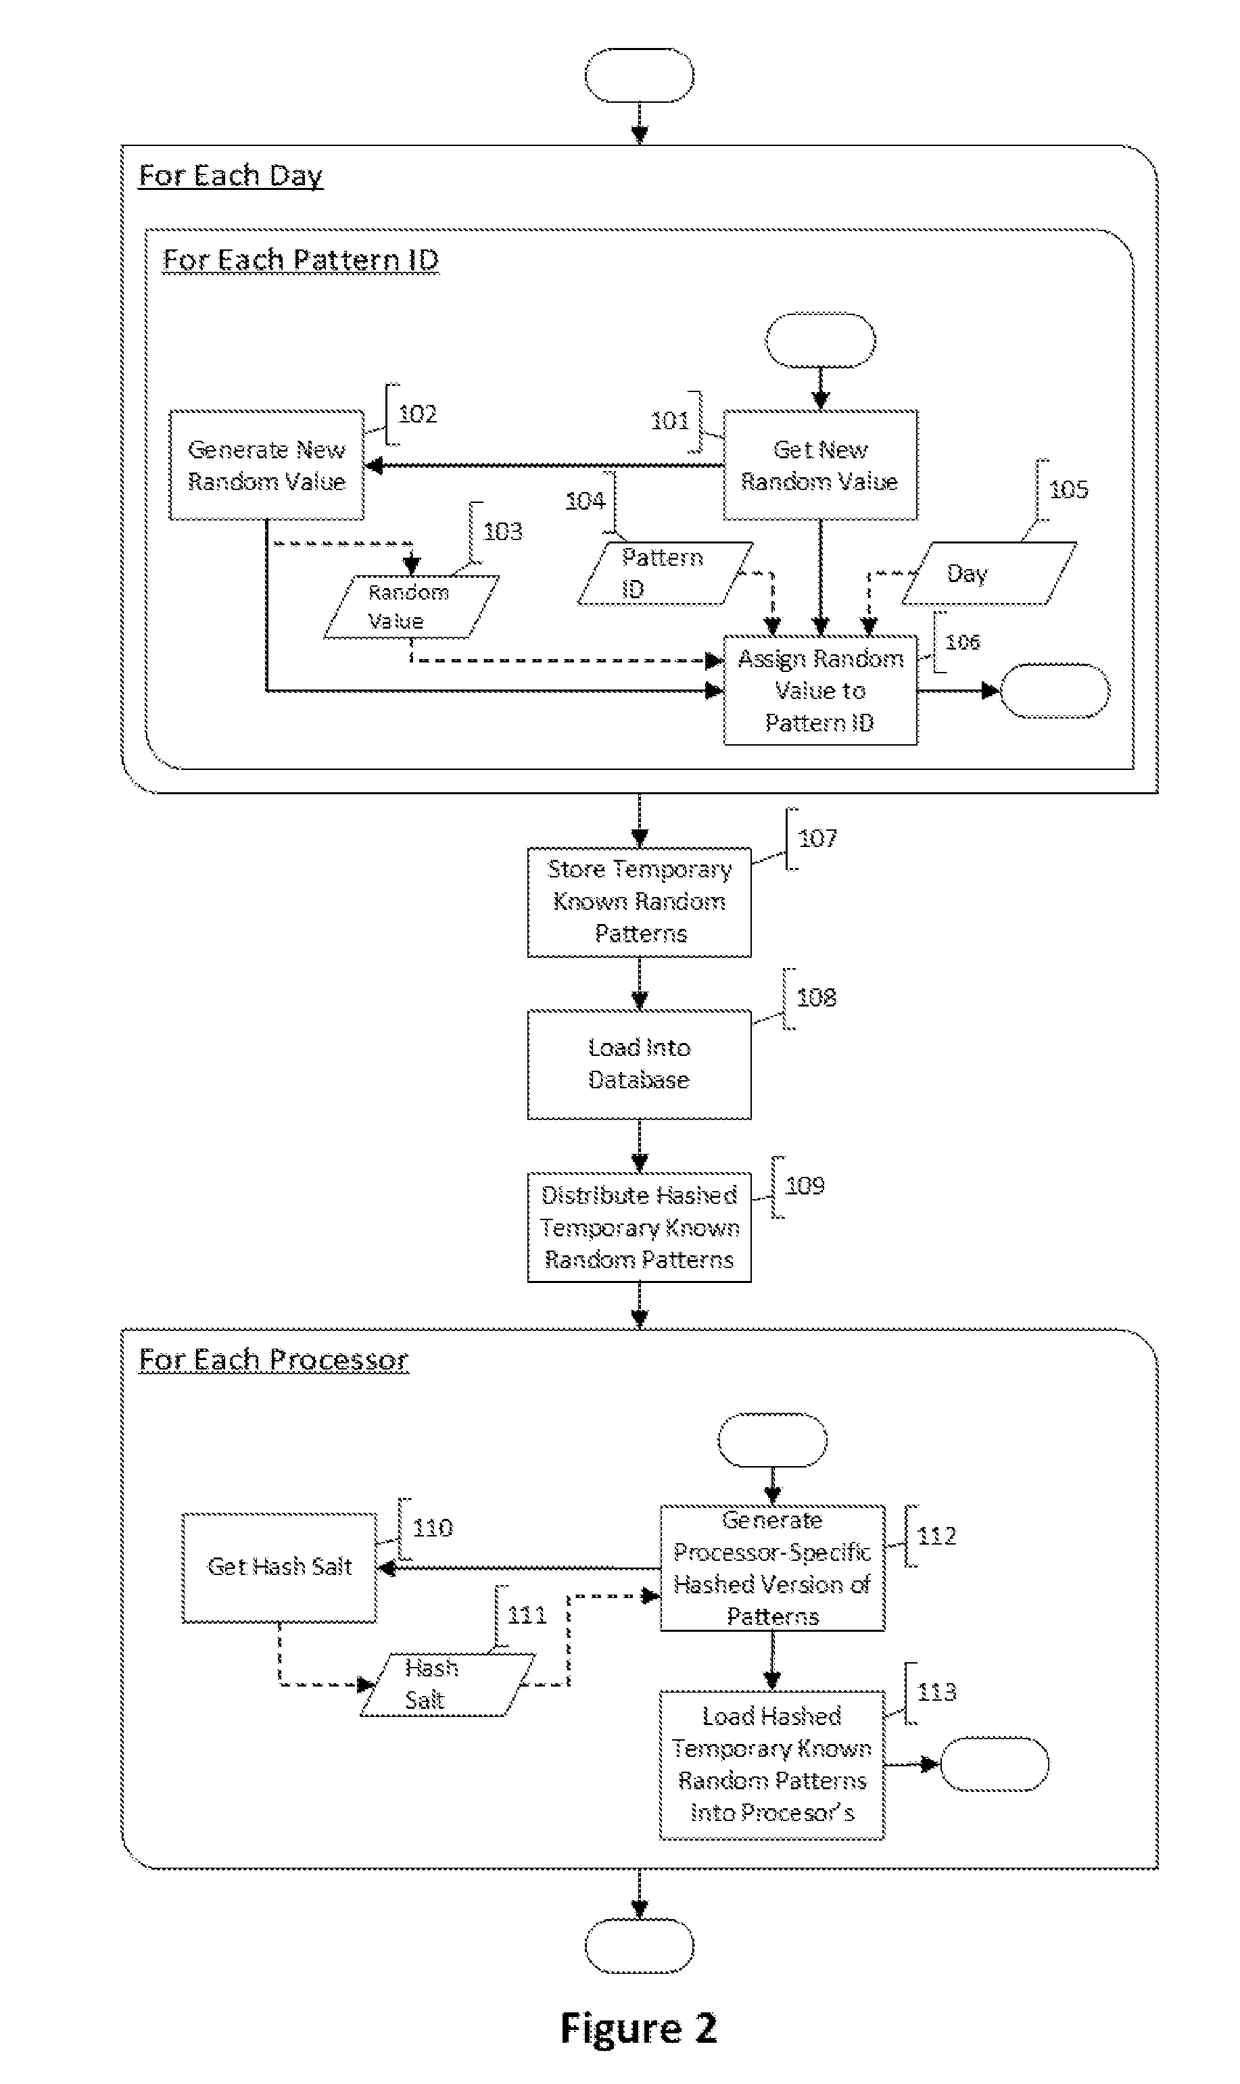 Security for electronic transactions and user authentication